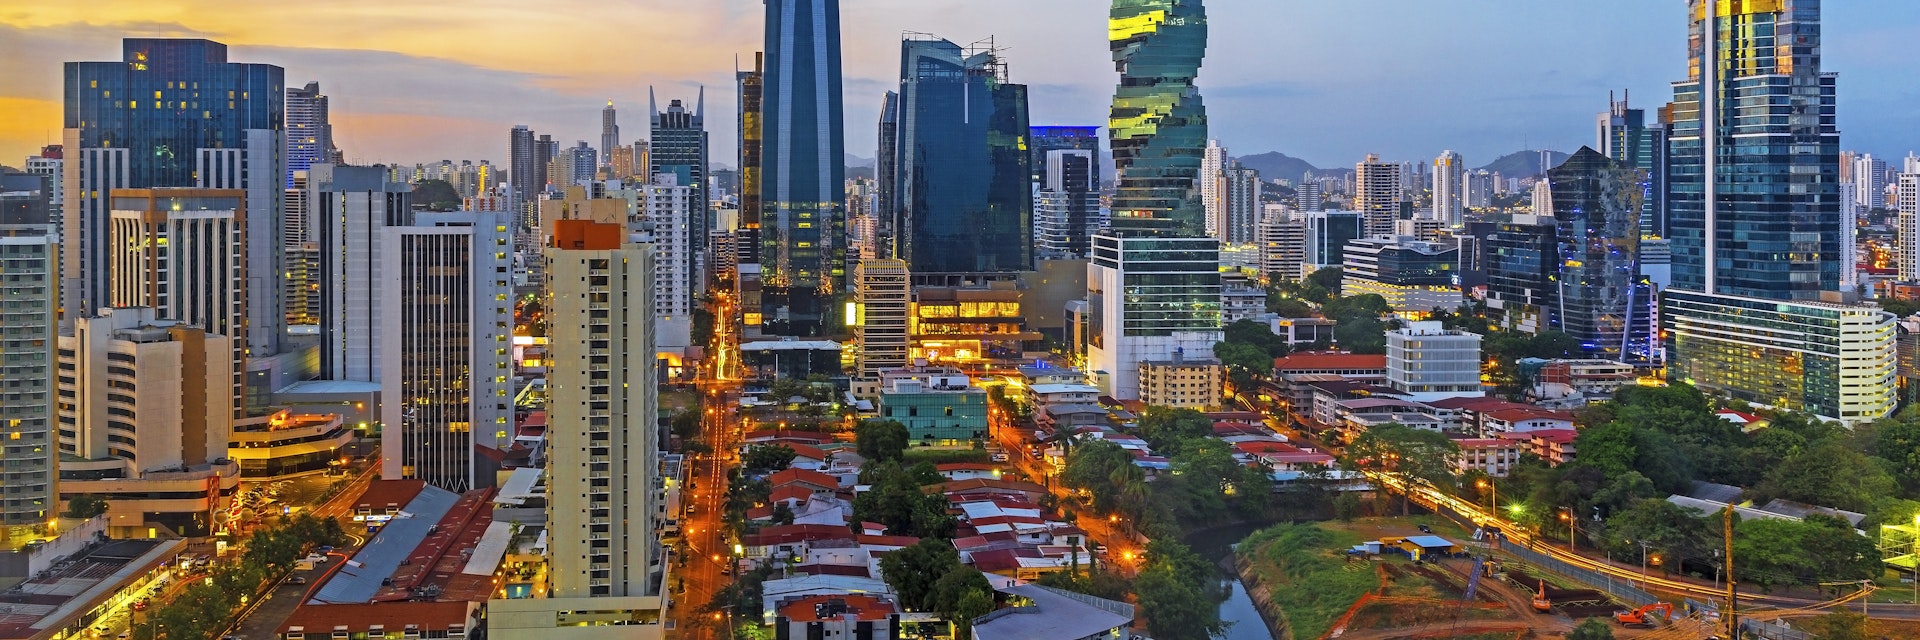 The skyline of Panama City with its skyscrapers in the financial district at sunset, Panama.
1264005950